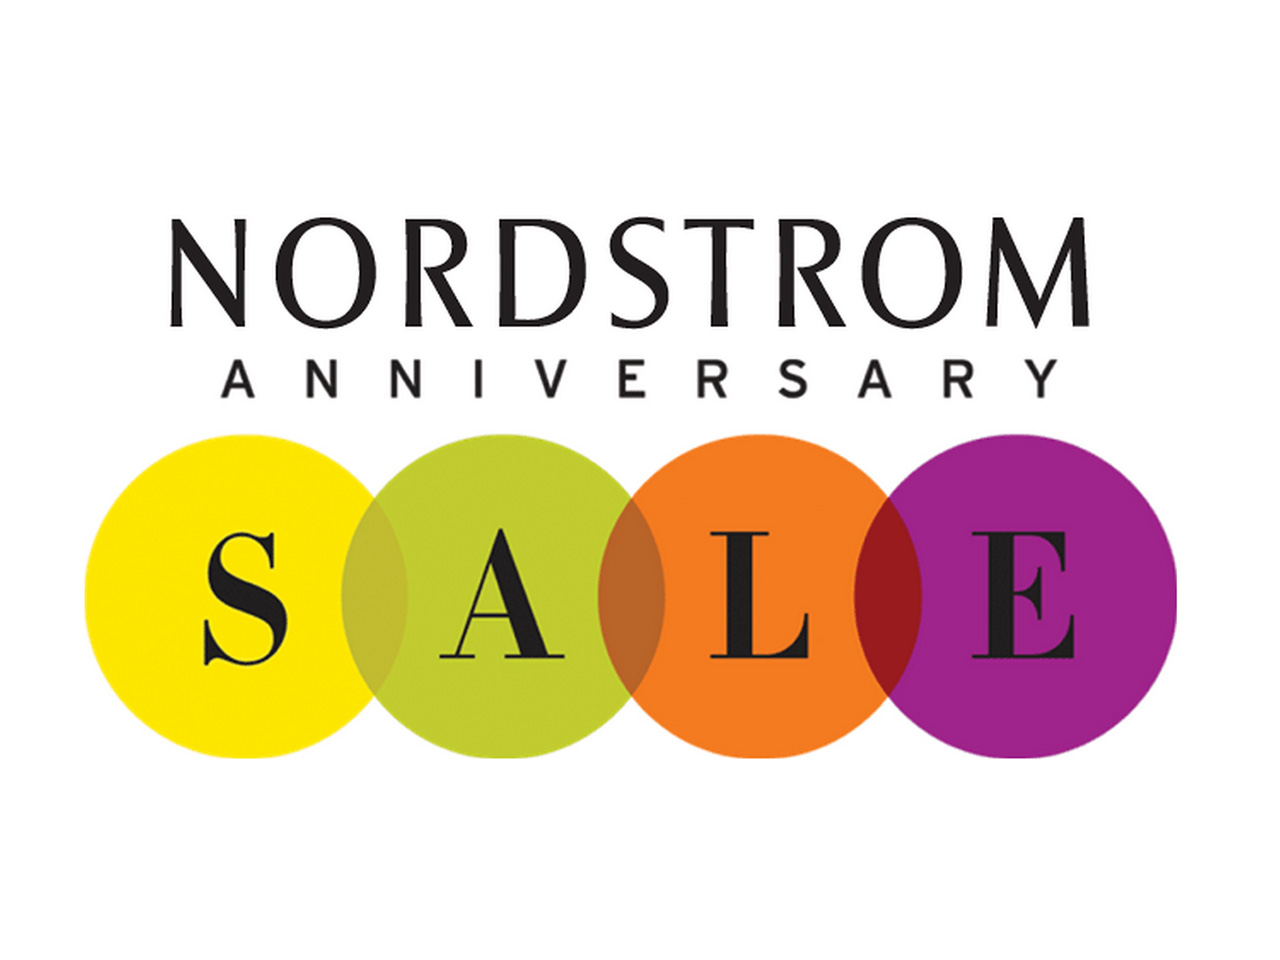 Nordstrom Anniversary Sale Deals, Nordstrom Giveaway, Cash Giveaway, PayPal Giveaway, Stephanie Ziajka, Diary of a Debutante